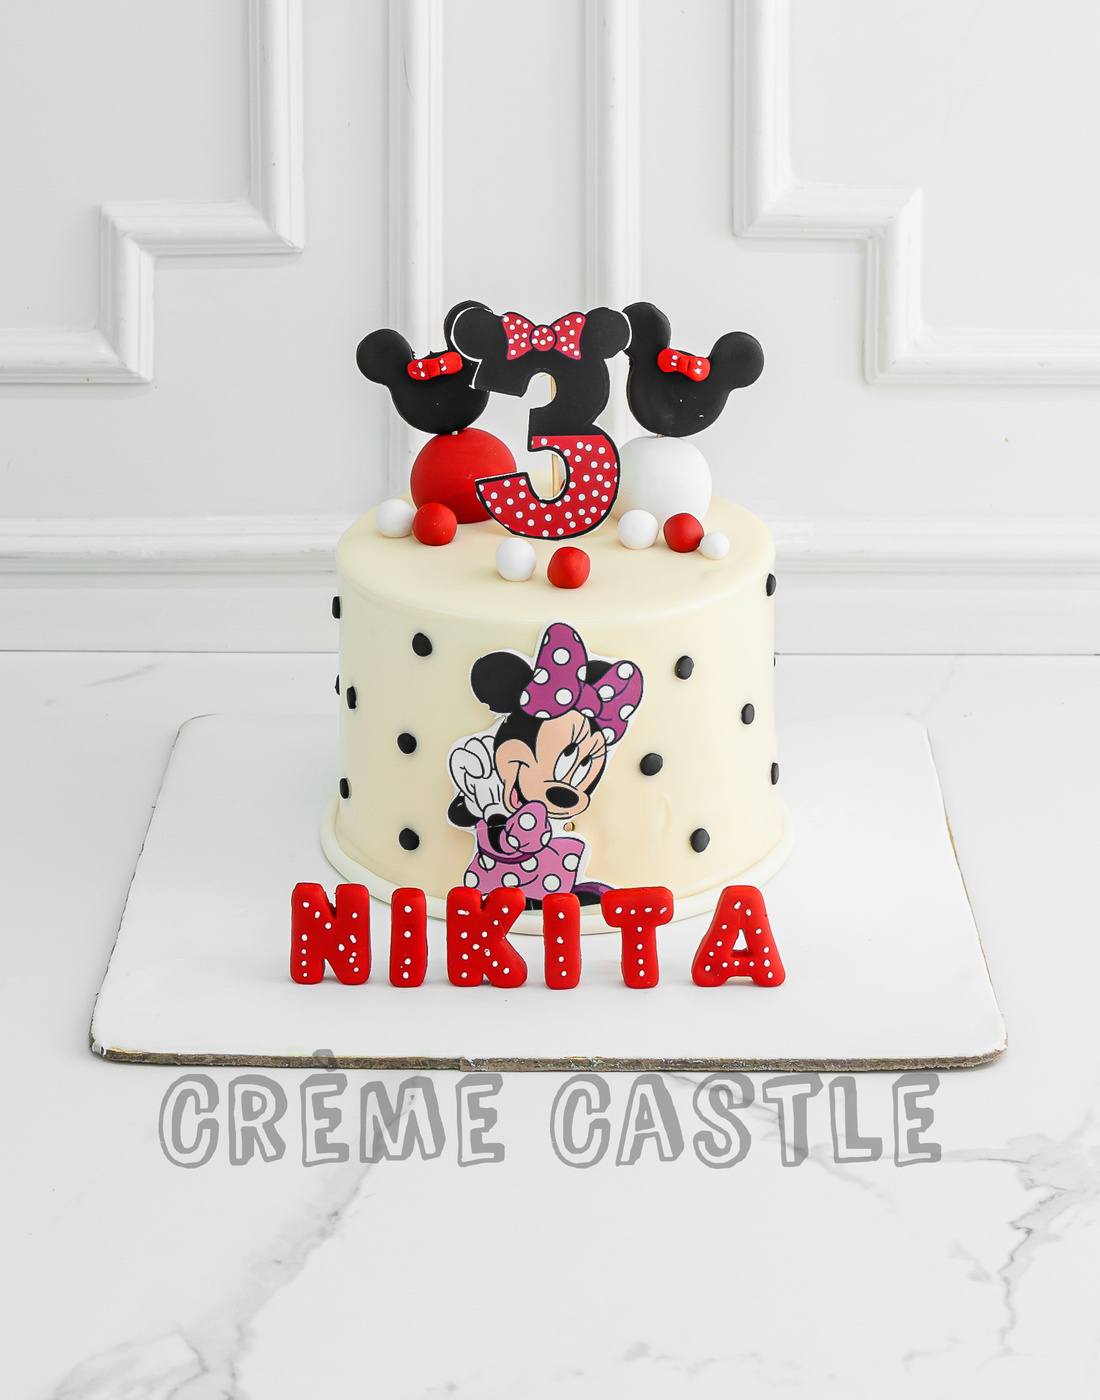 Mickey & Minnie Mouse Fondant Cake Delivery in Delhi NCR - ₹2,349.00 Cake  Express